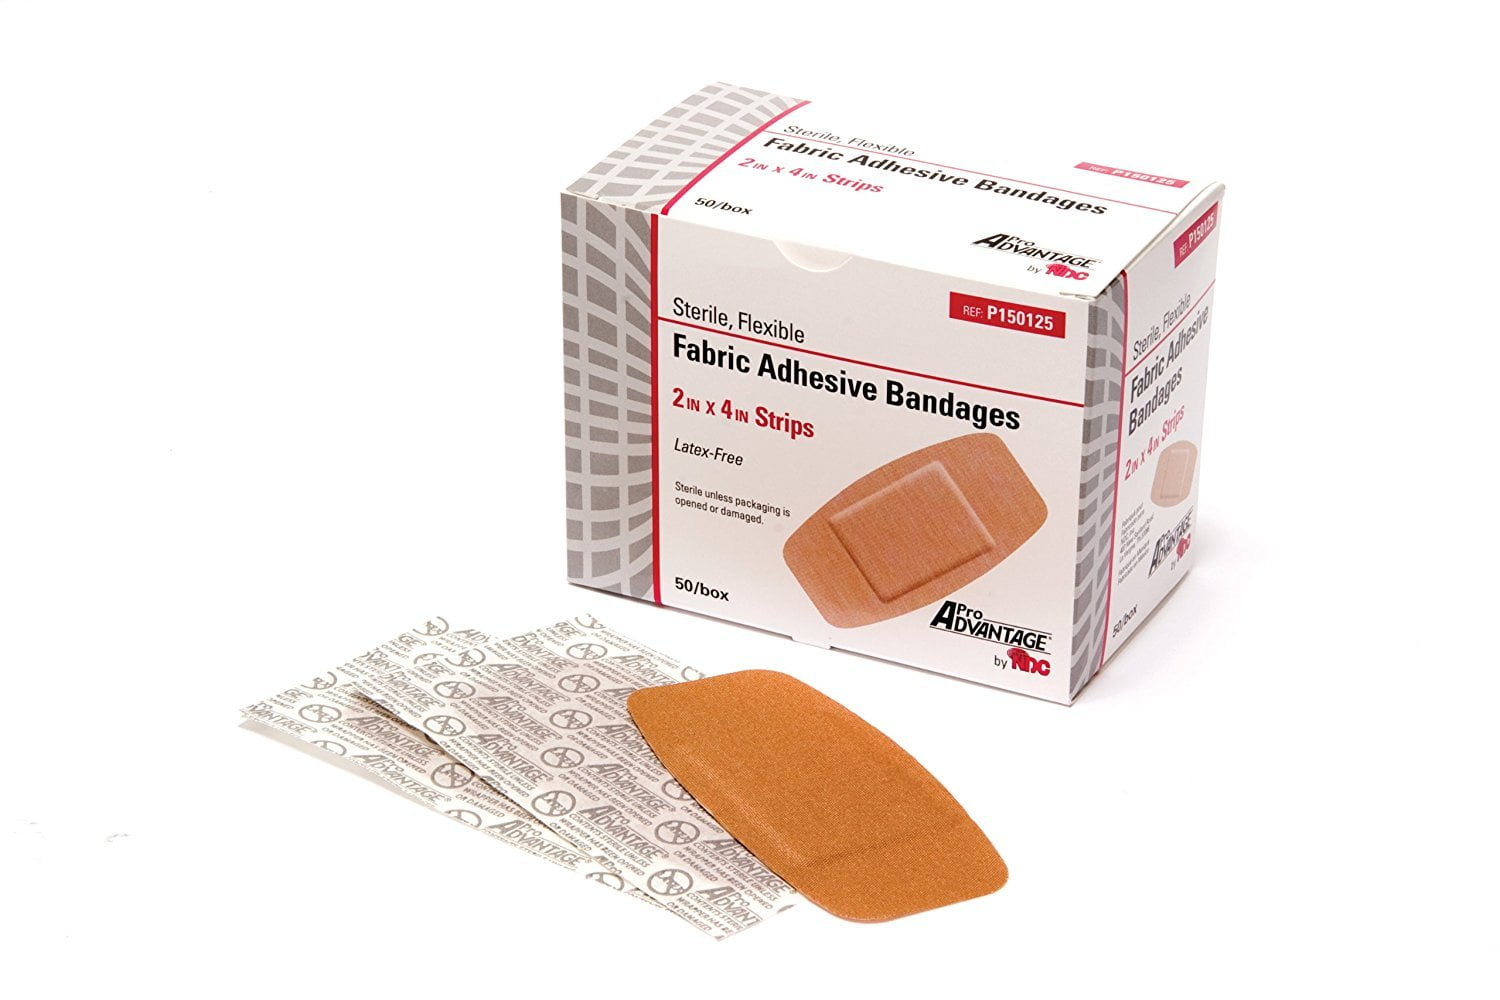 Pro Advantage P150125 Adhesive Bandage Strips 2 in. x 4 in. (Set of 3 Boxes  of 50)